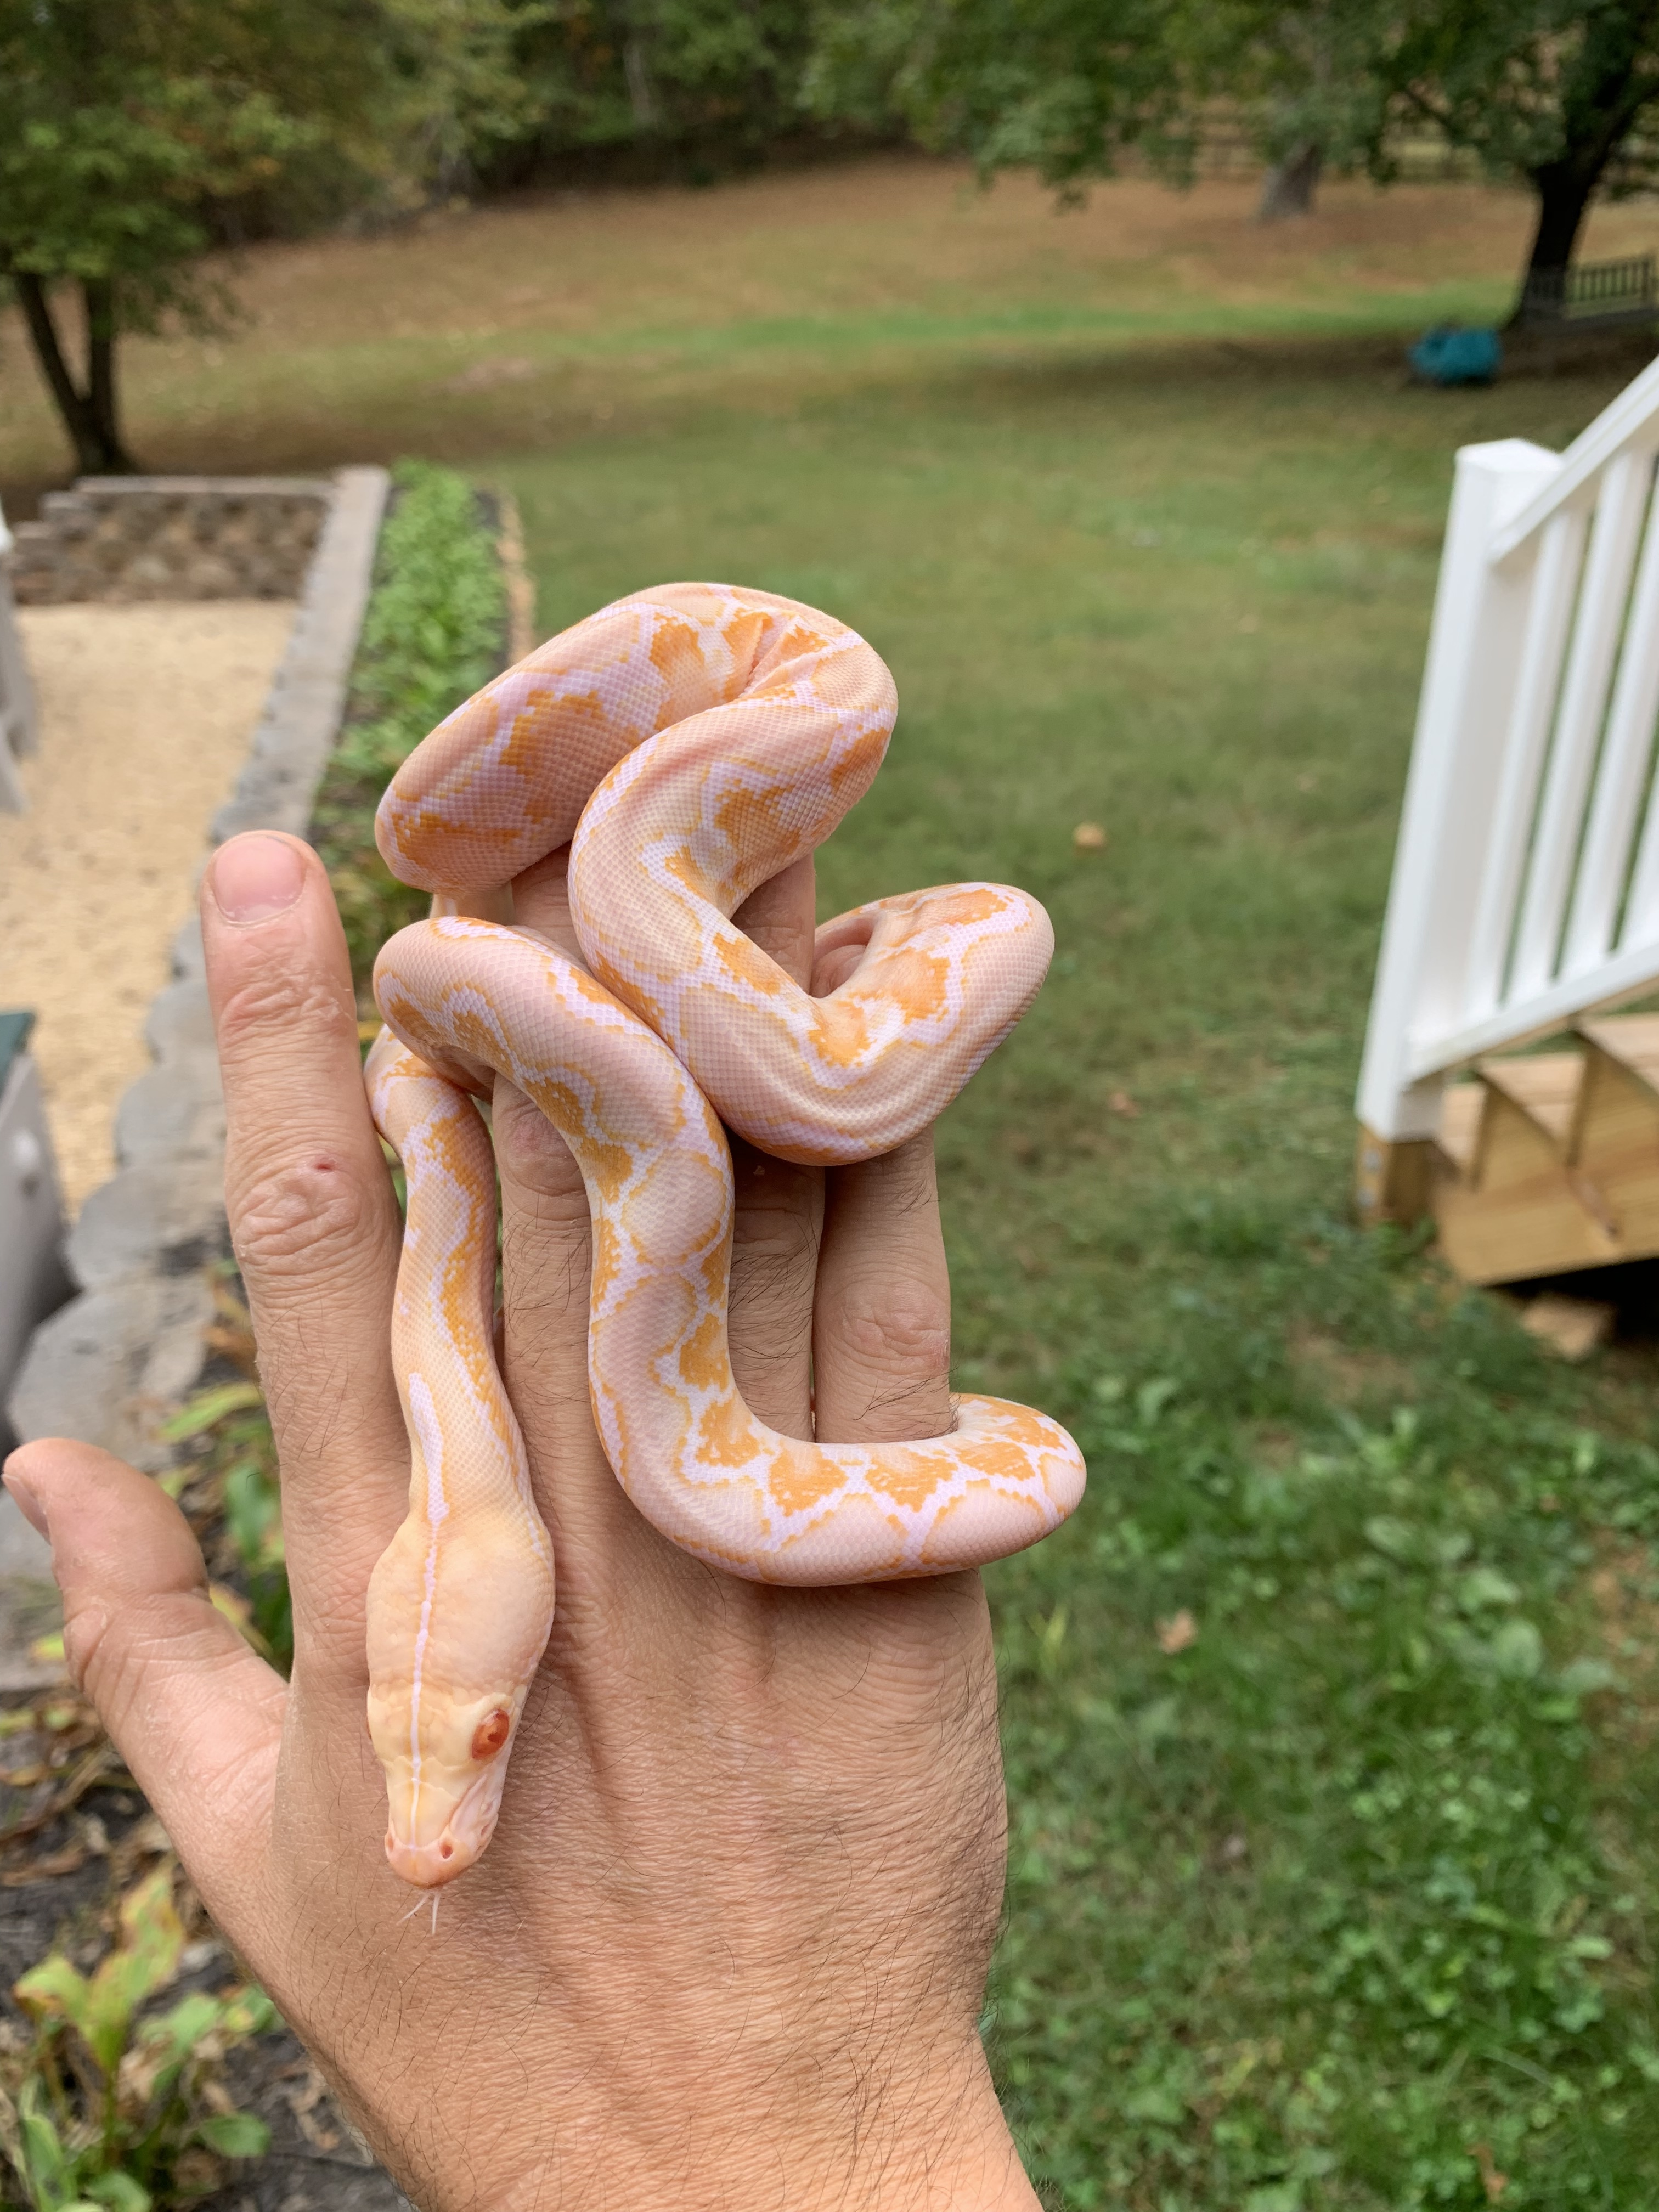 Amel Reticulated Python by Grand pythons